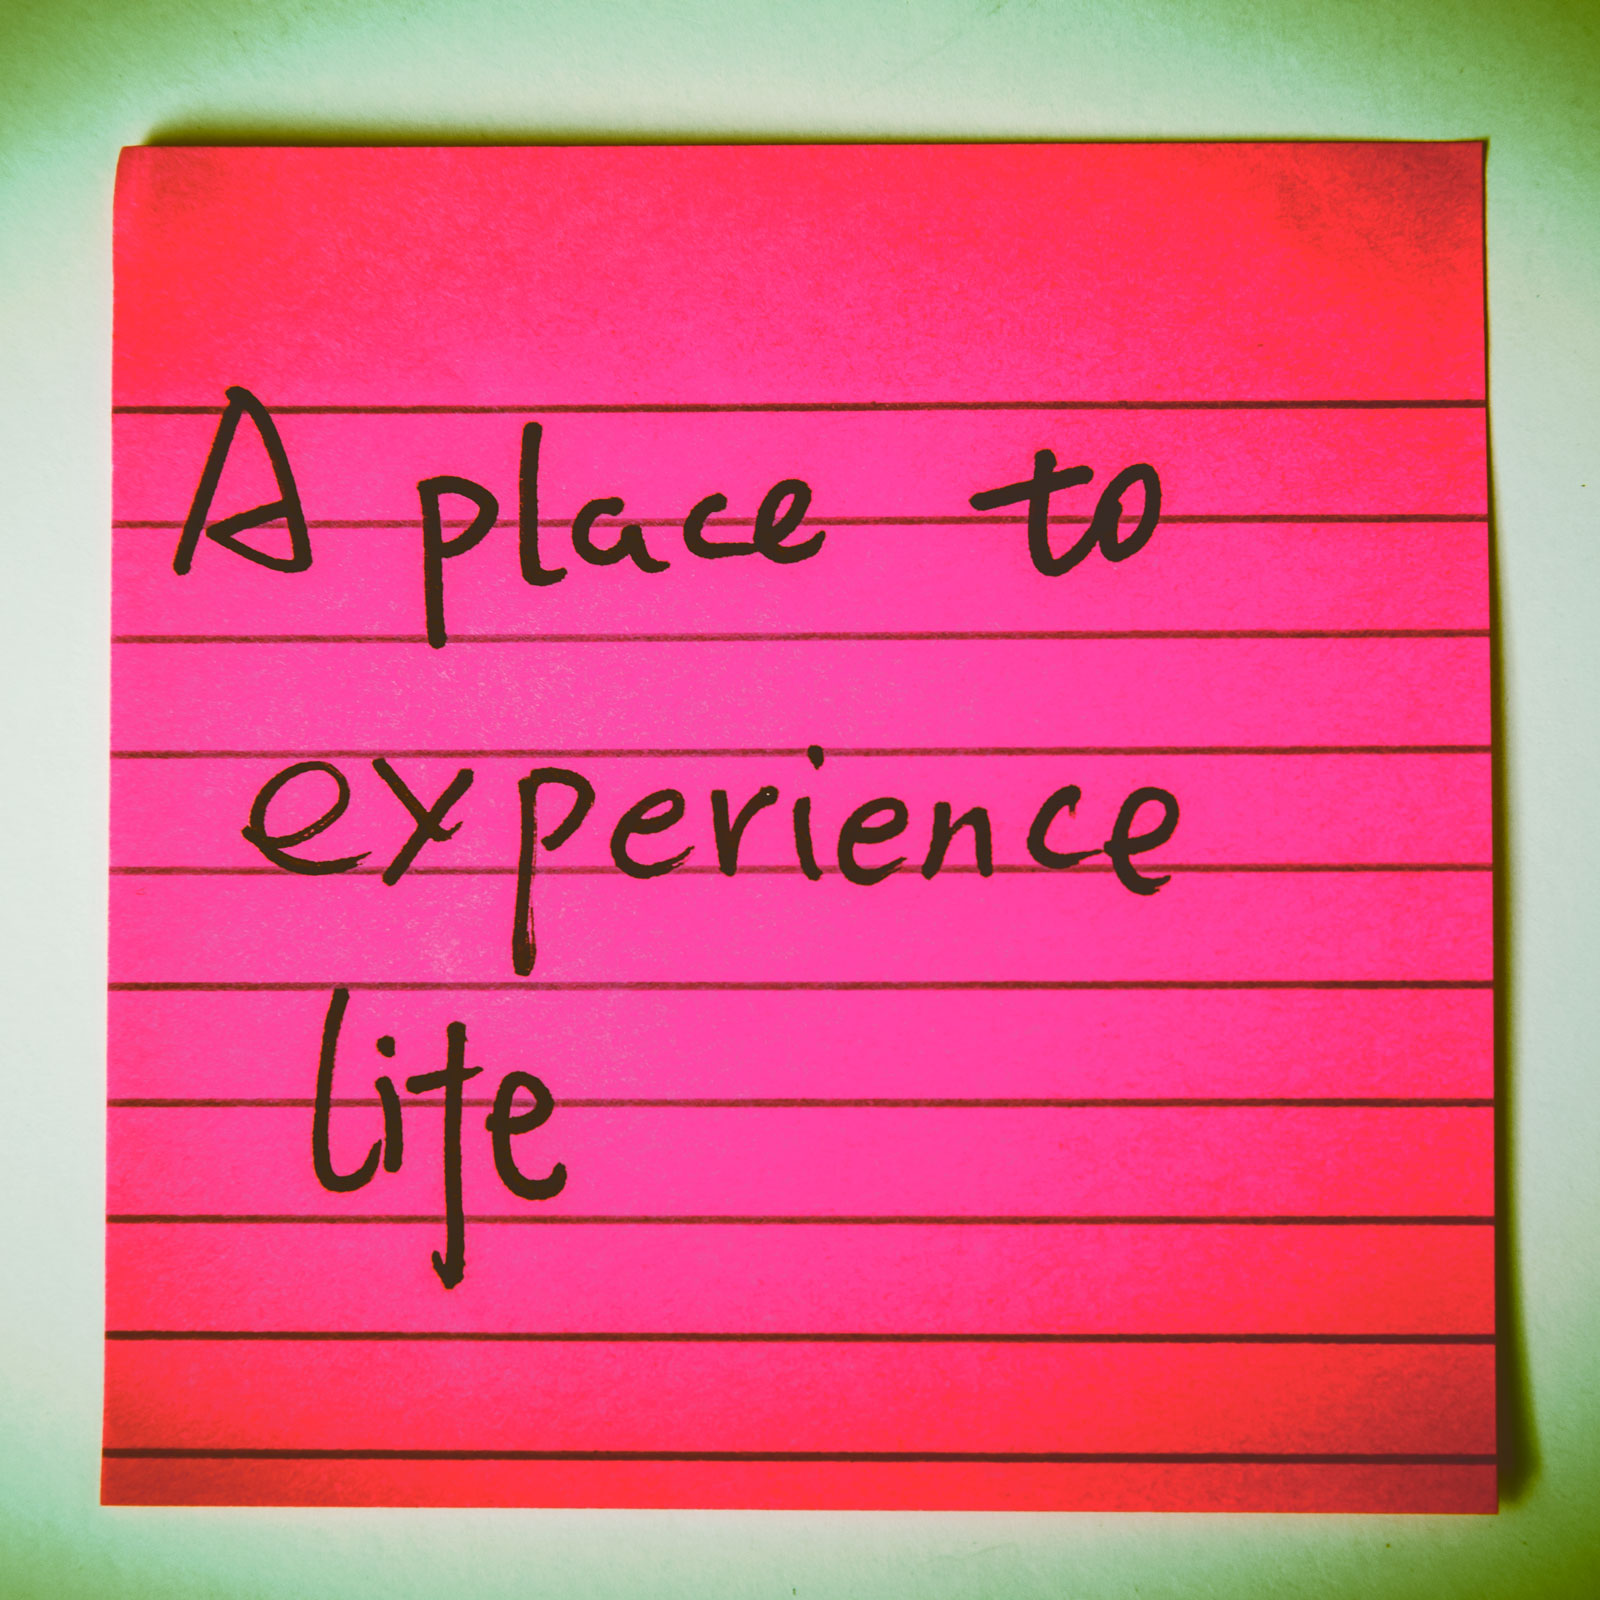 A place to experience life